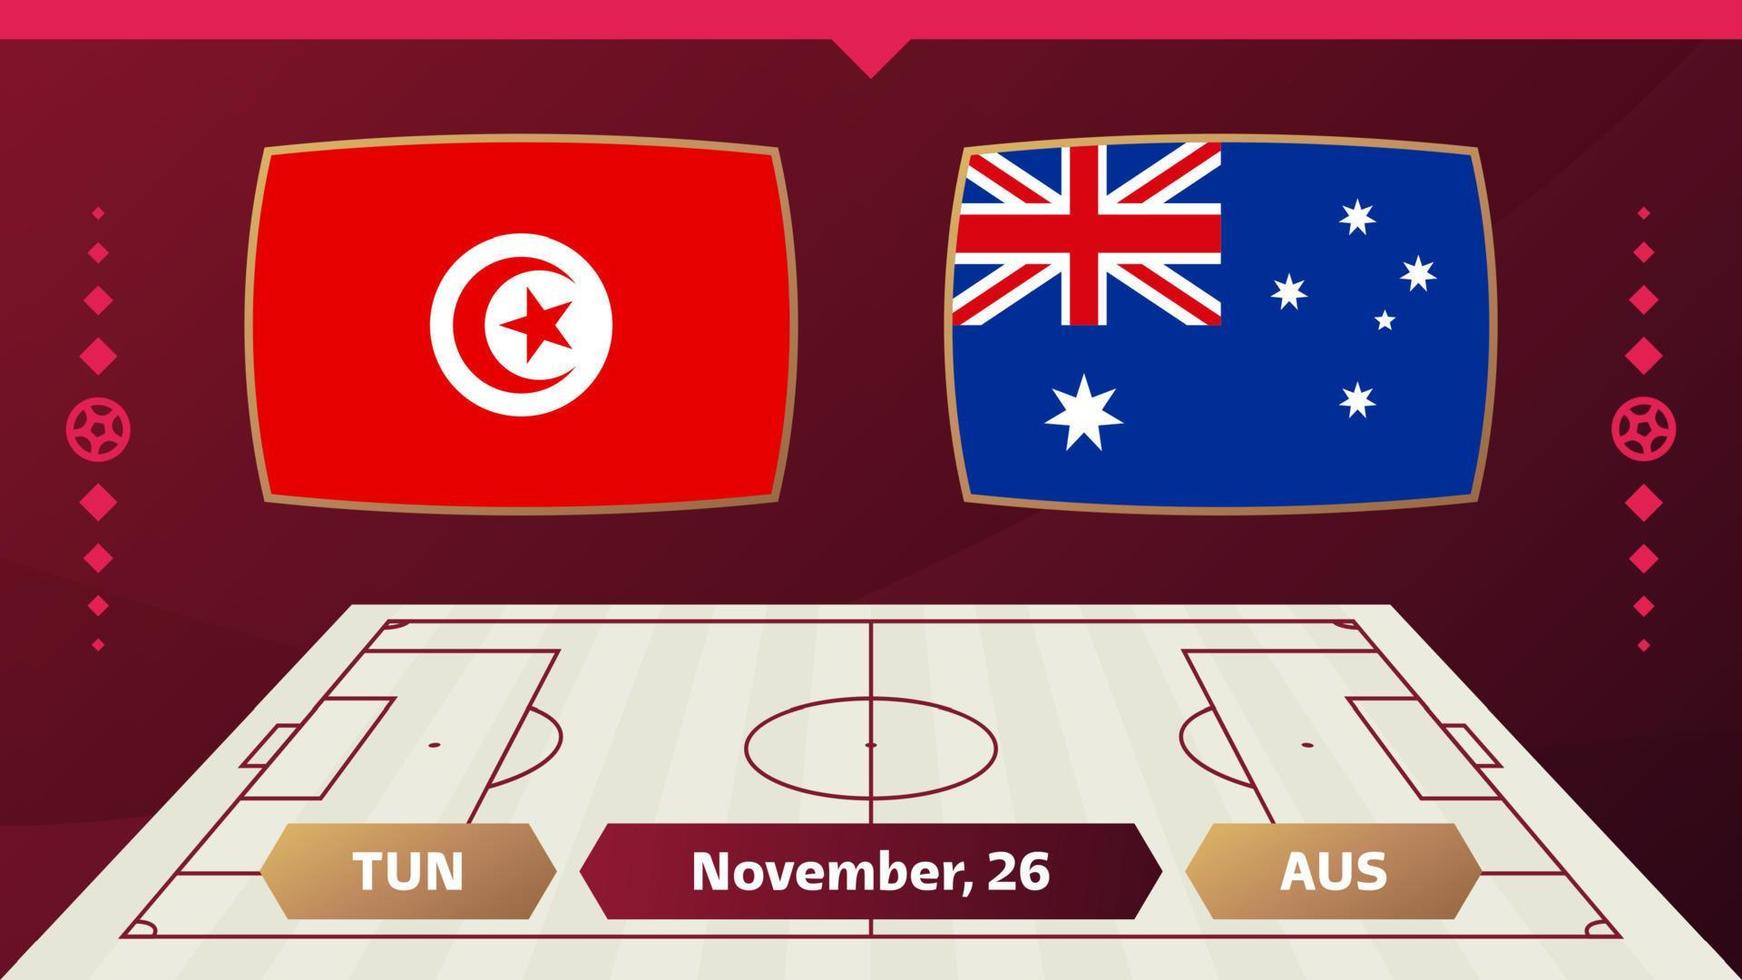 tunisia vs australia match. Football 2022 world championship match versus teams on soccer field. Intro sport background, championship competition final poster, flat style vector illustration